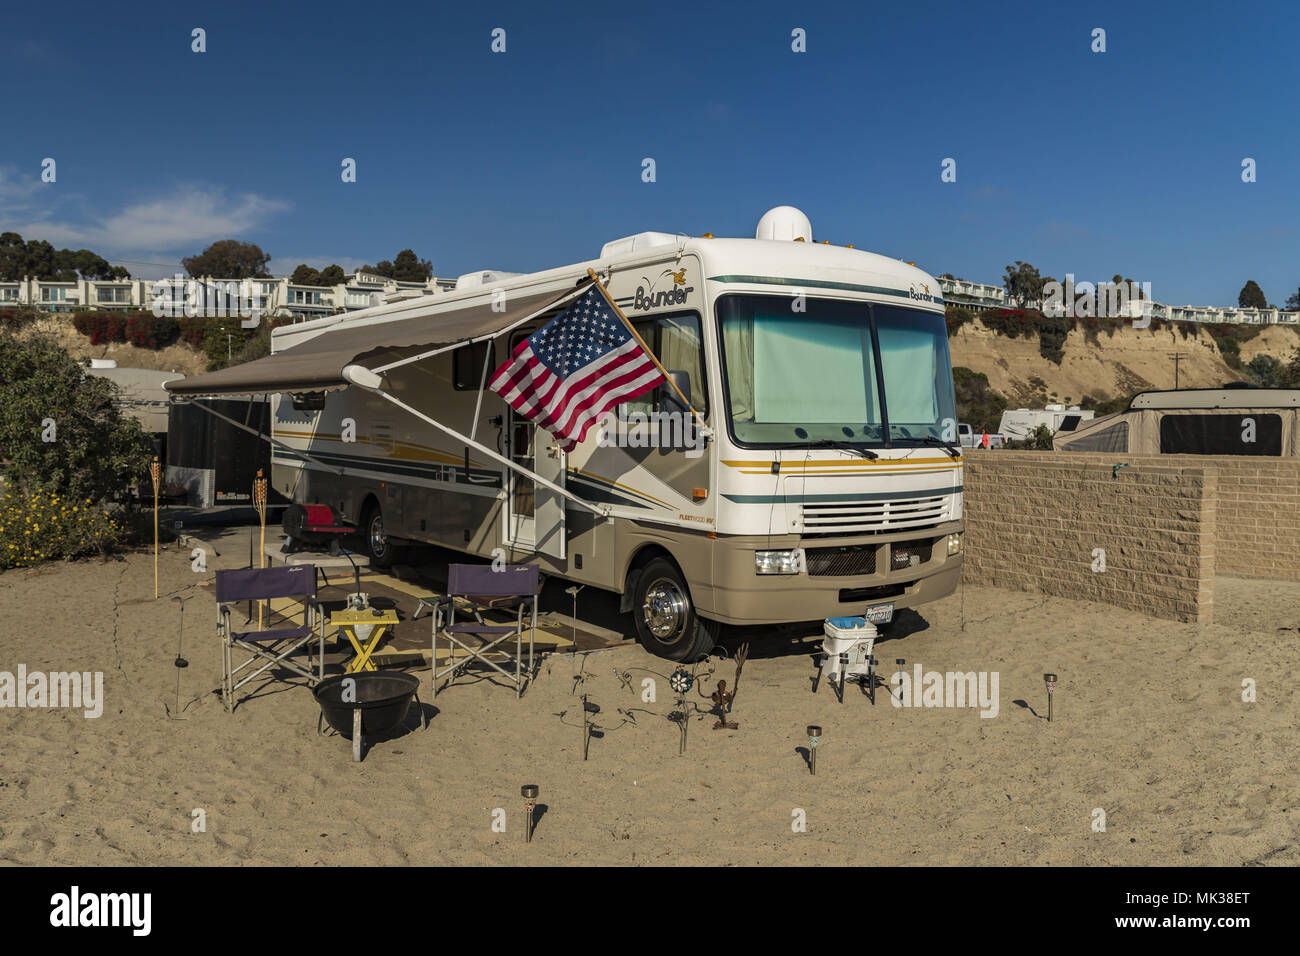 Irvine, California, USA. 30th Sep, 2017. The term recreational vehicle (RV) is often used as a broad category of motor vehicles and trailers which include living quarters for designed temporary accommodation. Typical amenities of an RV include a kitchen, a bathroom, and one or more sleeping facilities. RVs can range from the utilitarian containing only sleeping quarters and basic cooking facilities to the luxurious, with features like air conditioning (AC), water heaters, televisions and satellite receptors, and quartz countertops, for example.RVs can either be trailers (which are Stock Photo